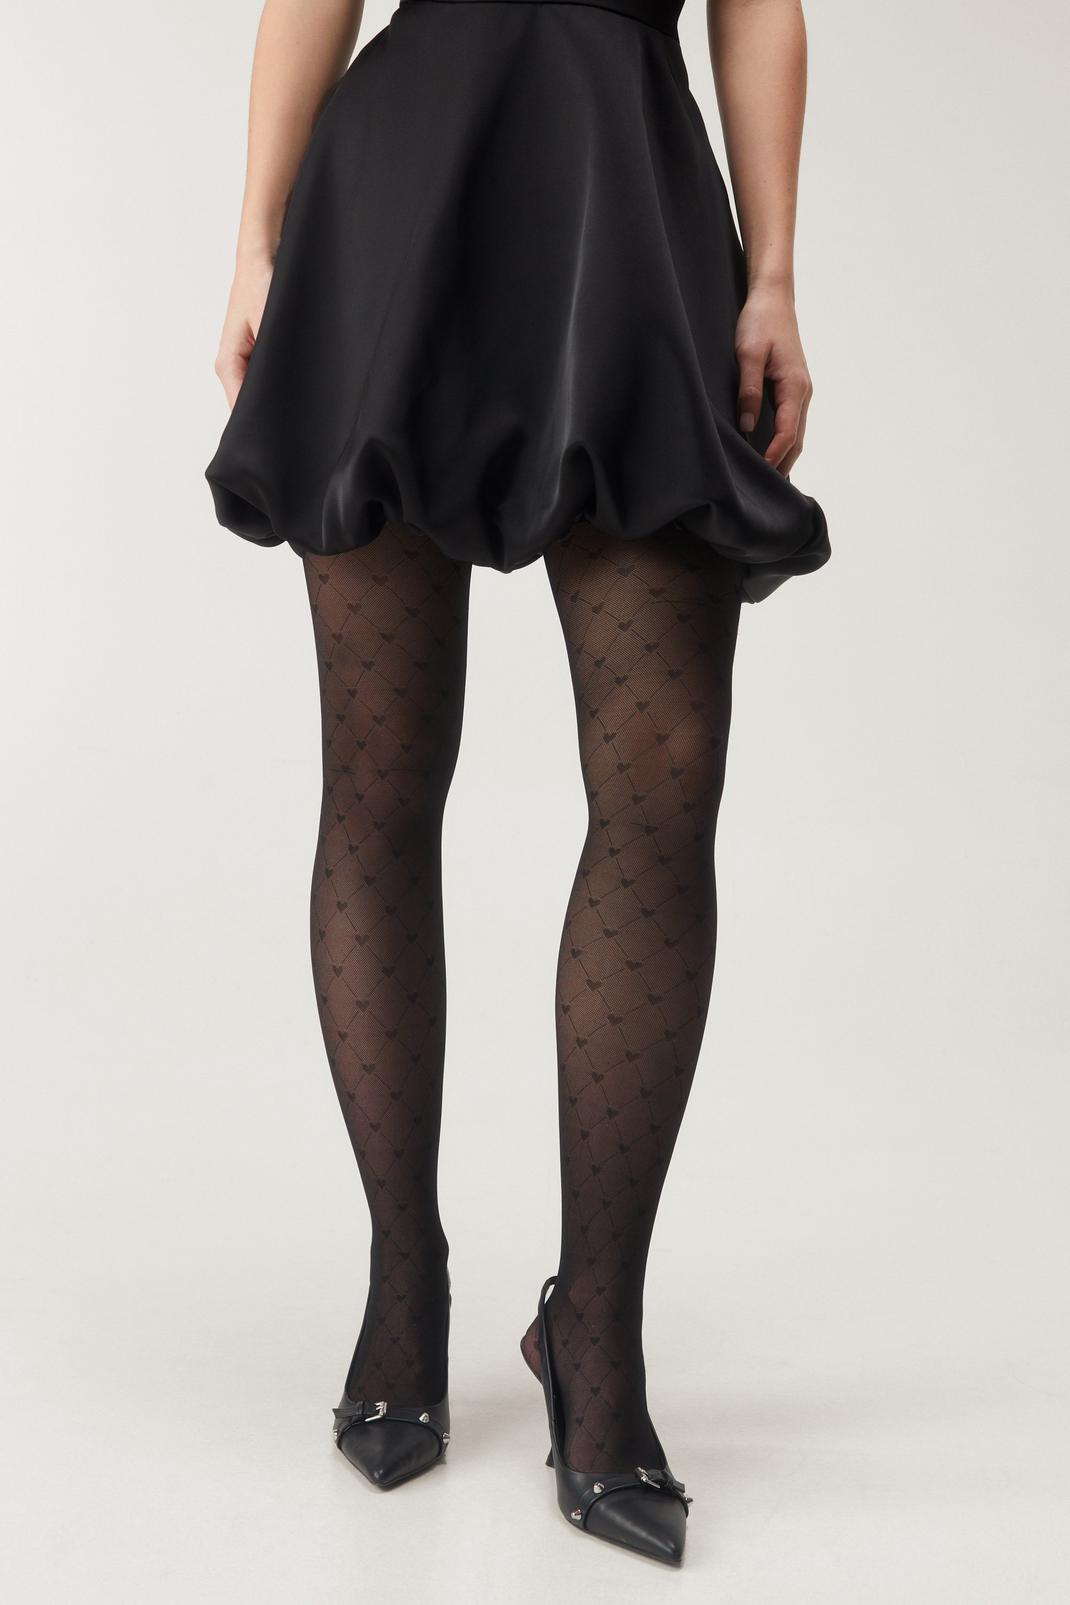 Black Heart Diamond Patterned Tights image number 1